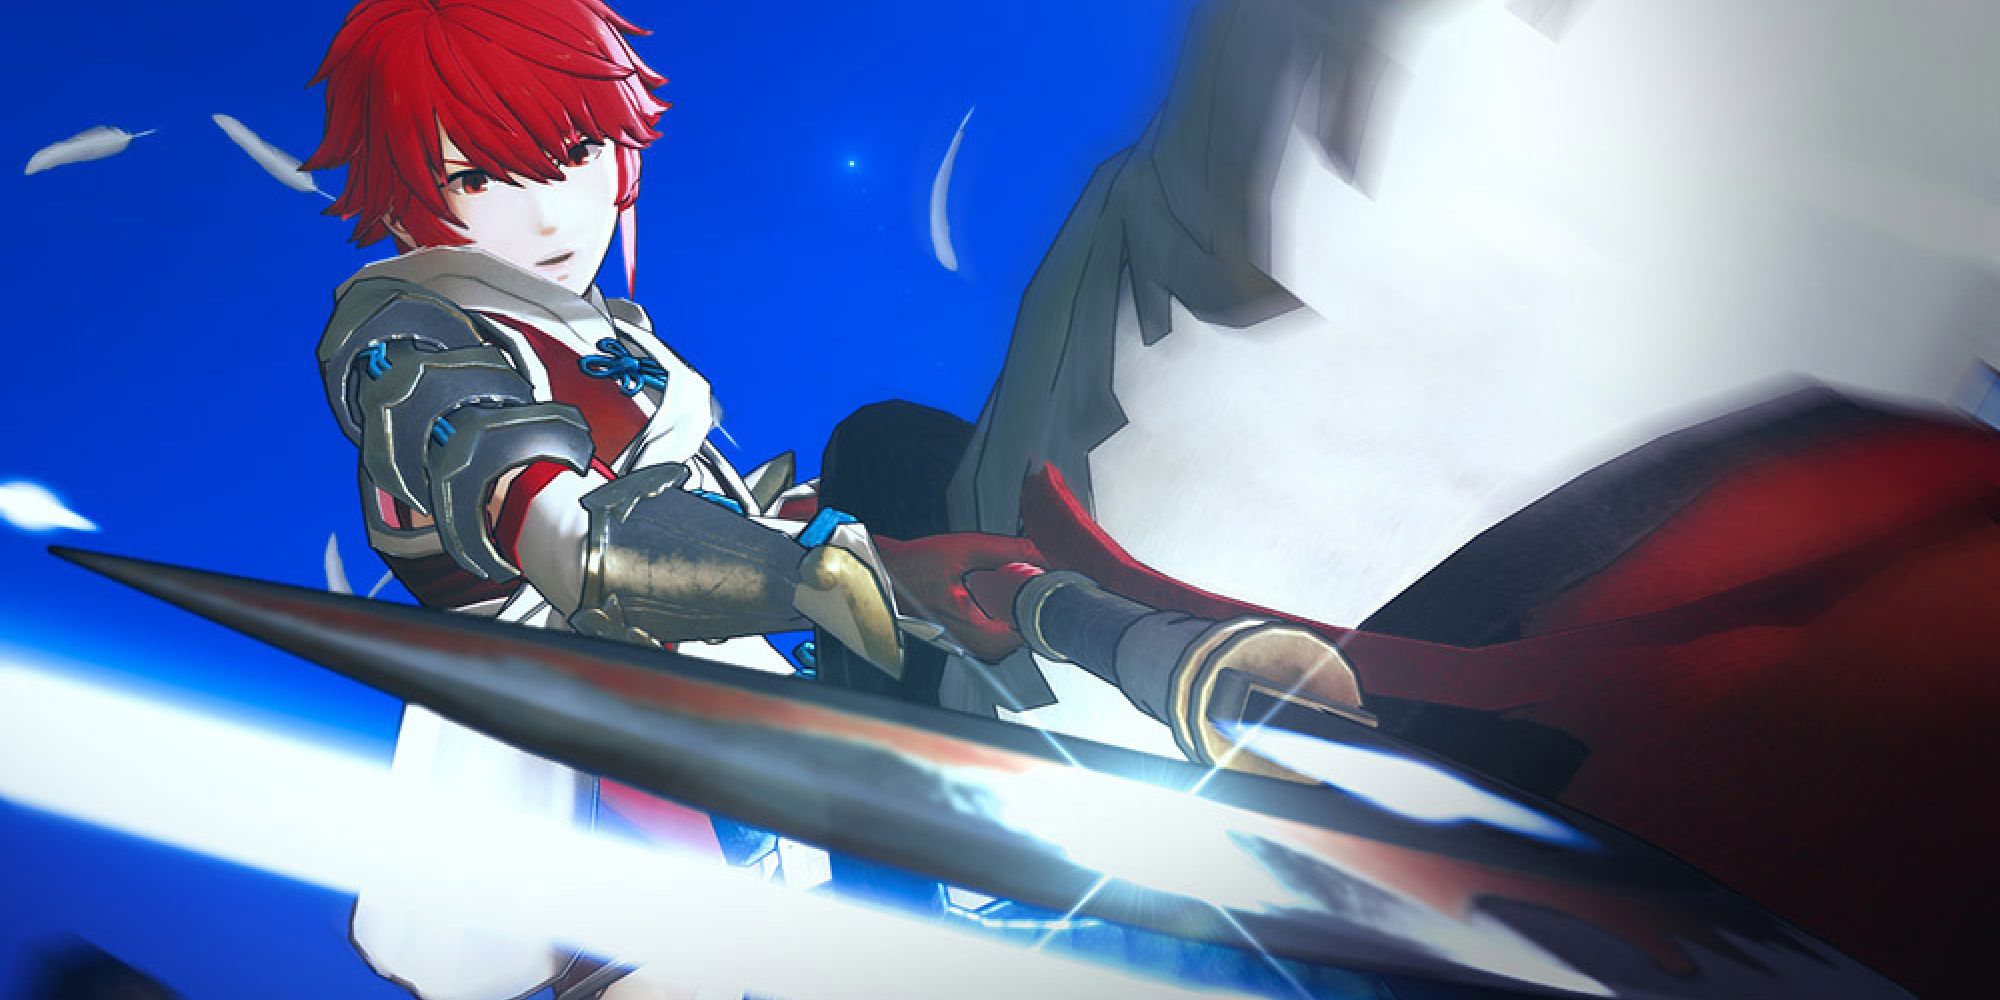 Hinoka wielding her spear in a cinematic from Fire Emblem Warriors